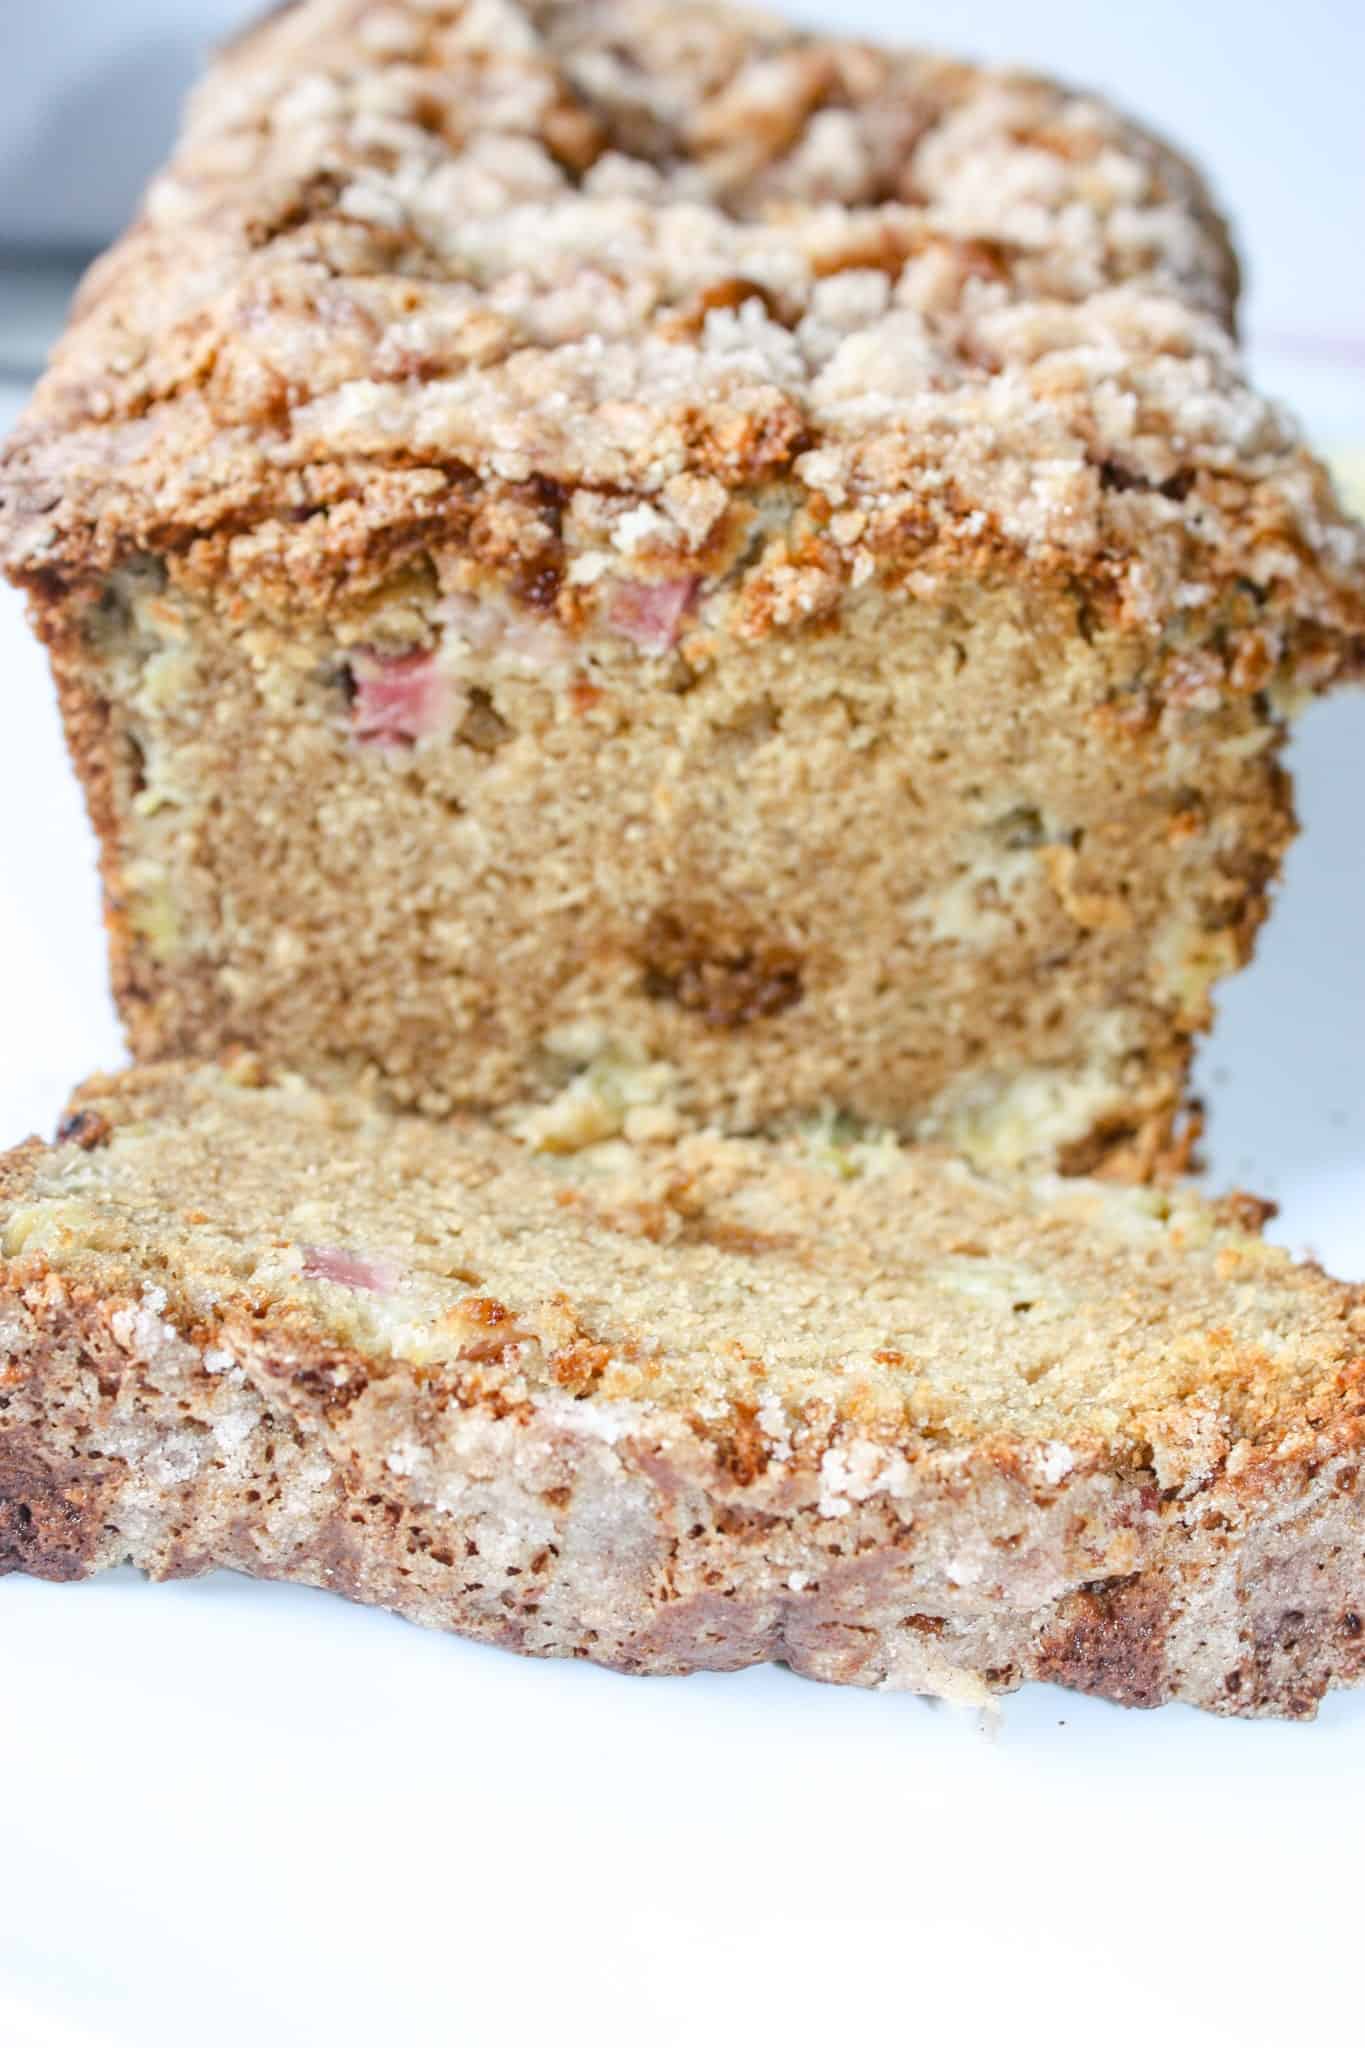 Gluten Free Rhubarb Loaf is a tasty option to use seasonal rhubarb.  This moist bread makes a great snack to pair with your favourite beverage.